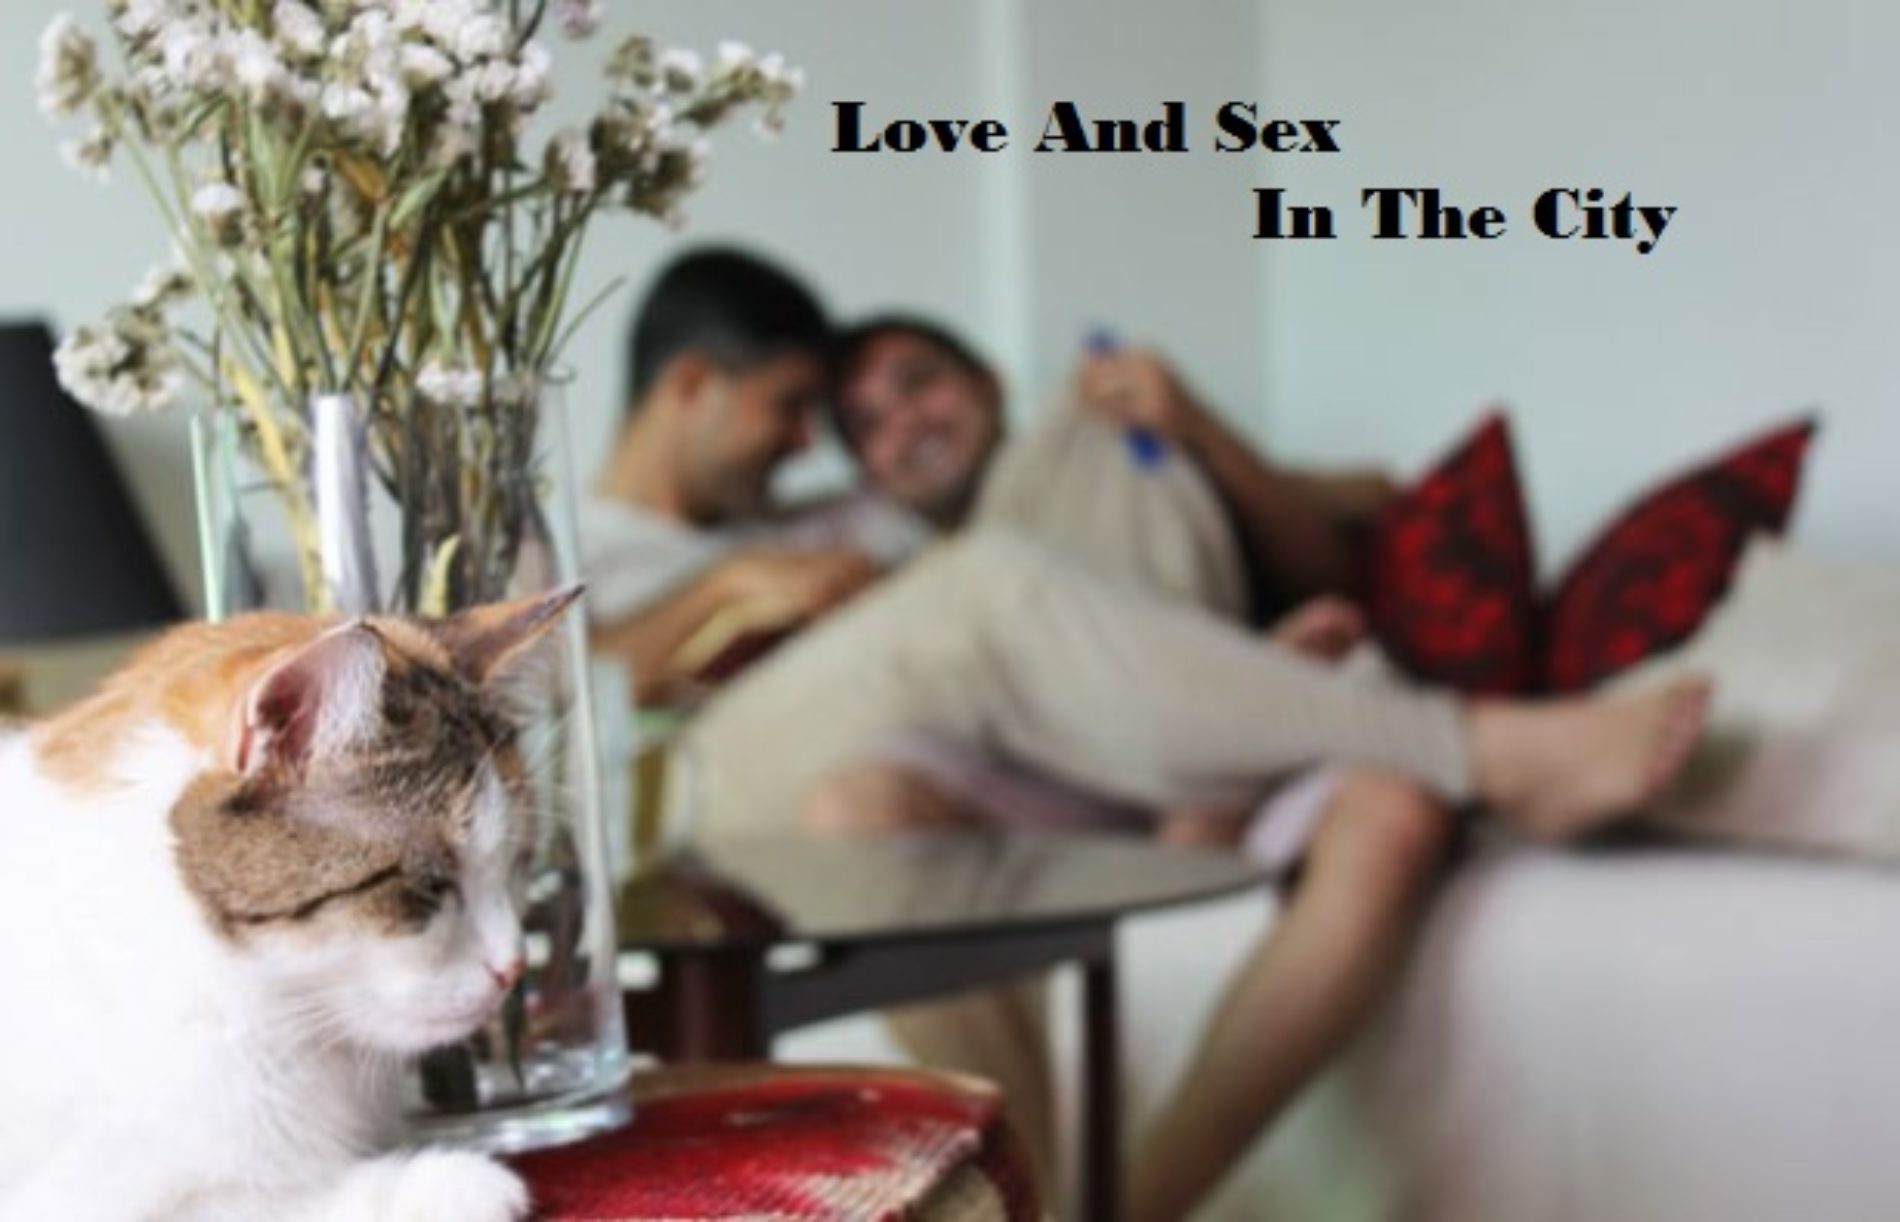 LOVE AND SEX IN THE CITY (Episode 34)